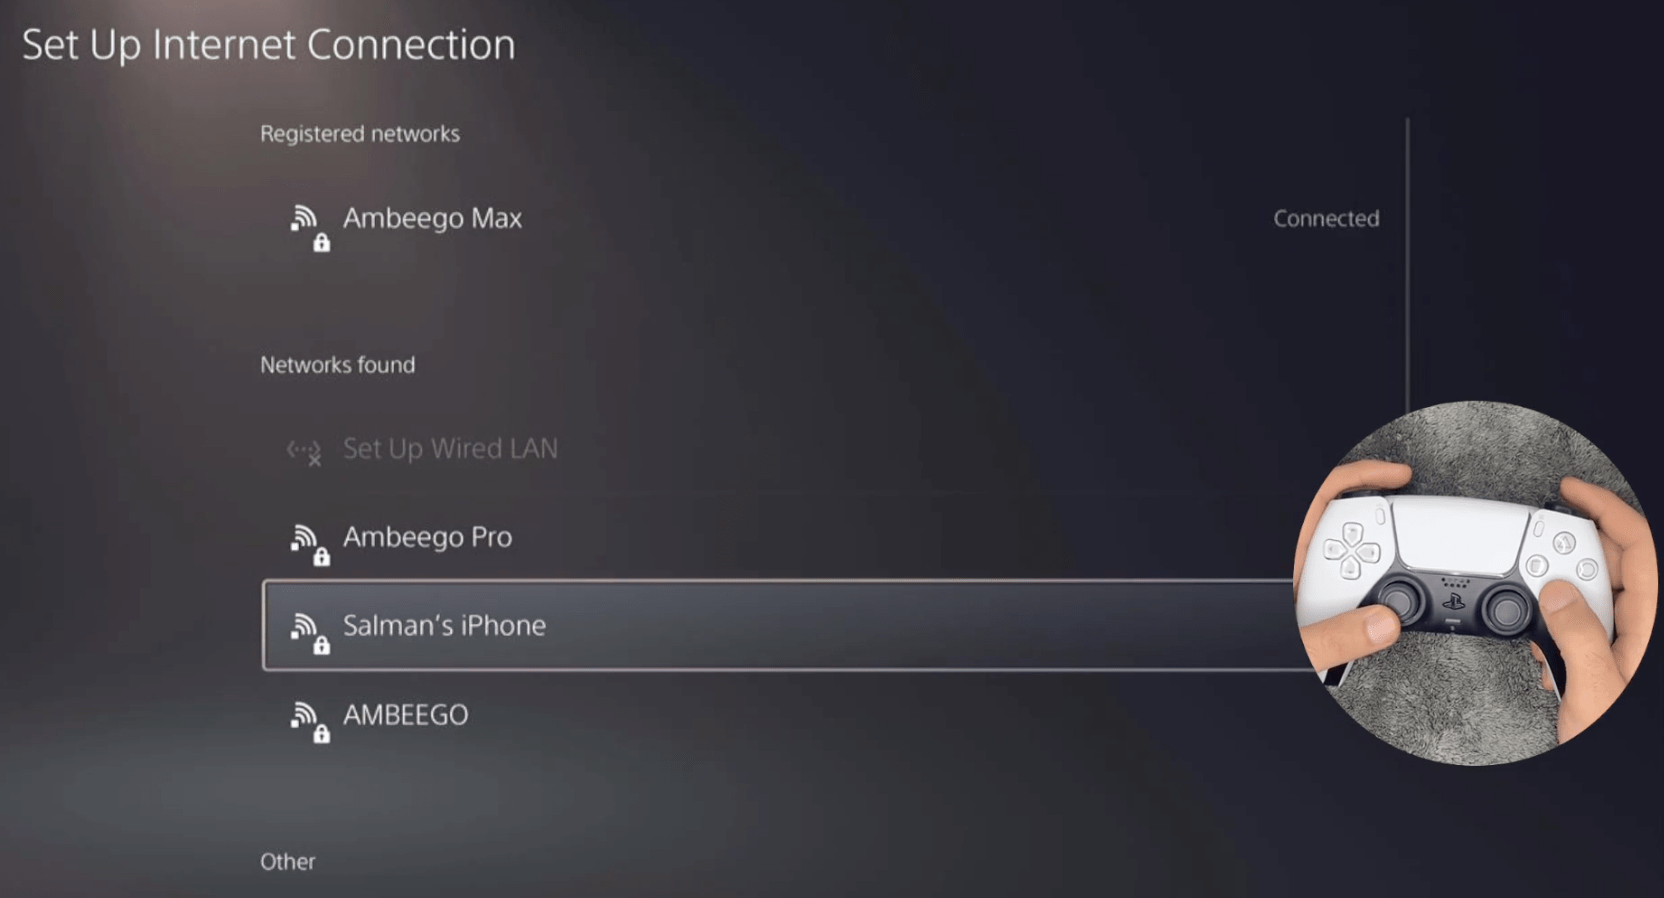 ps5 available list with a selected wifi that is not yet connected